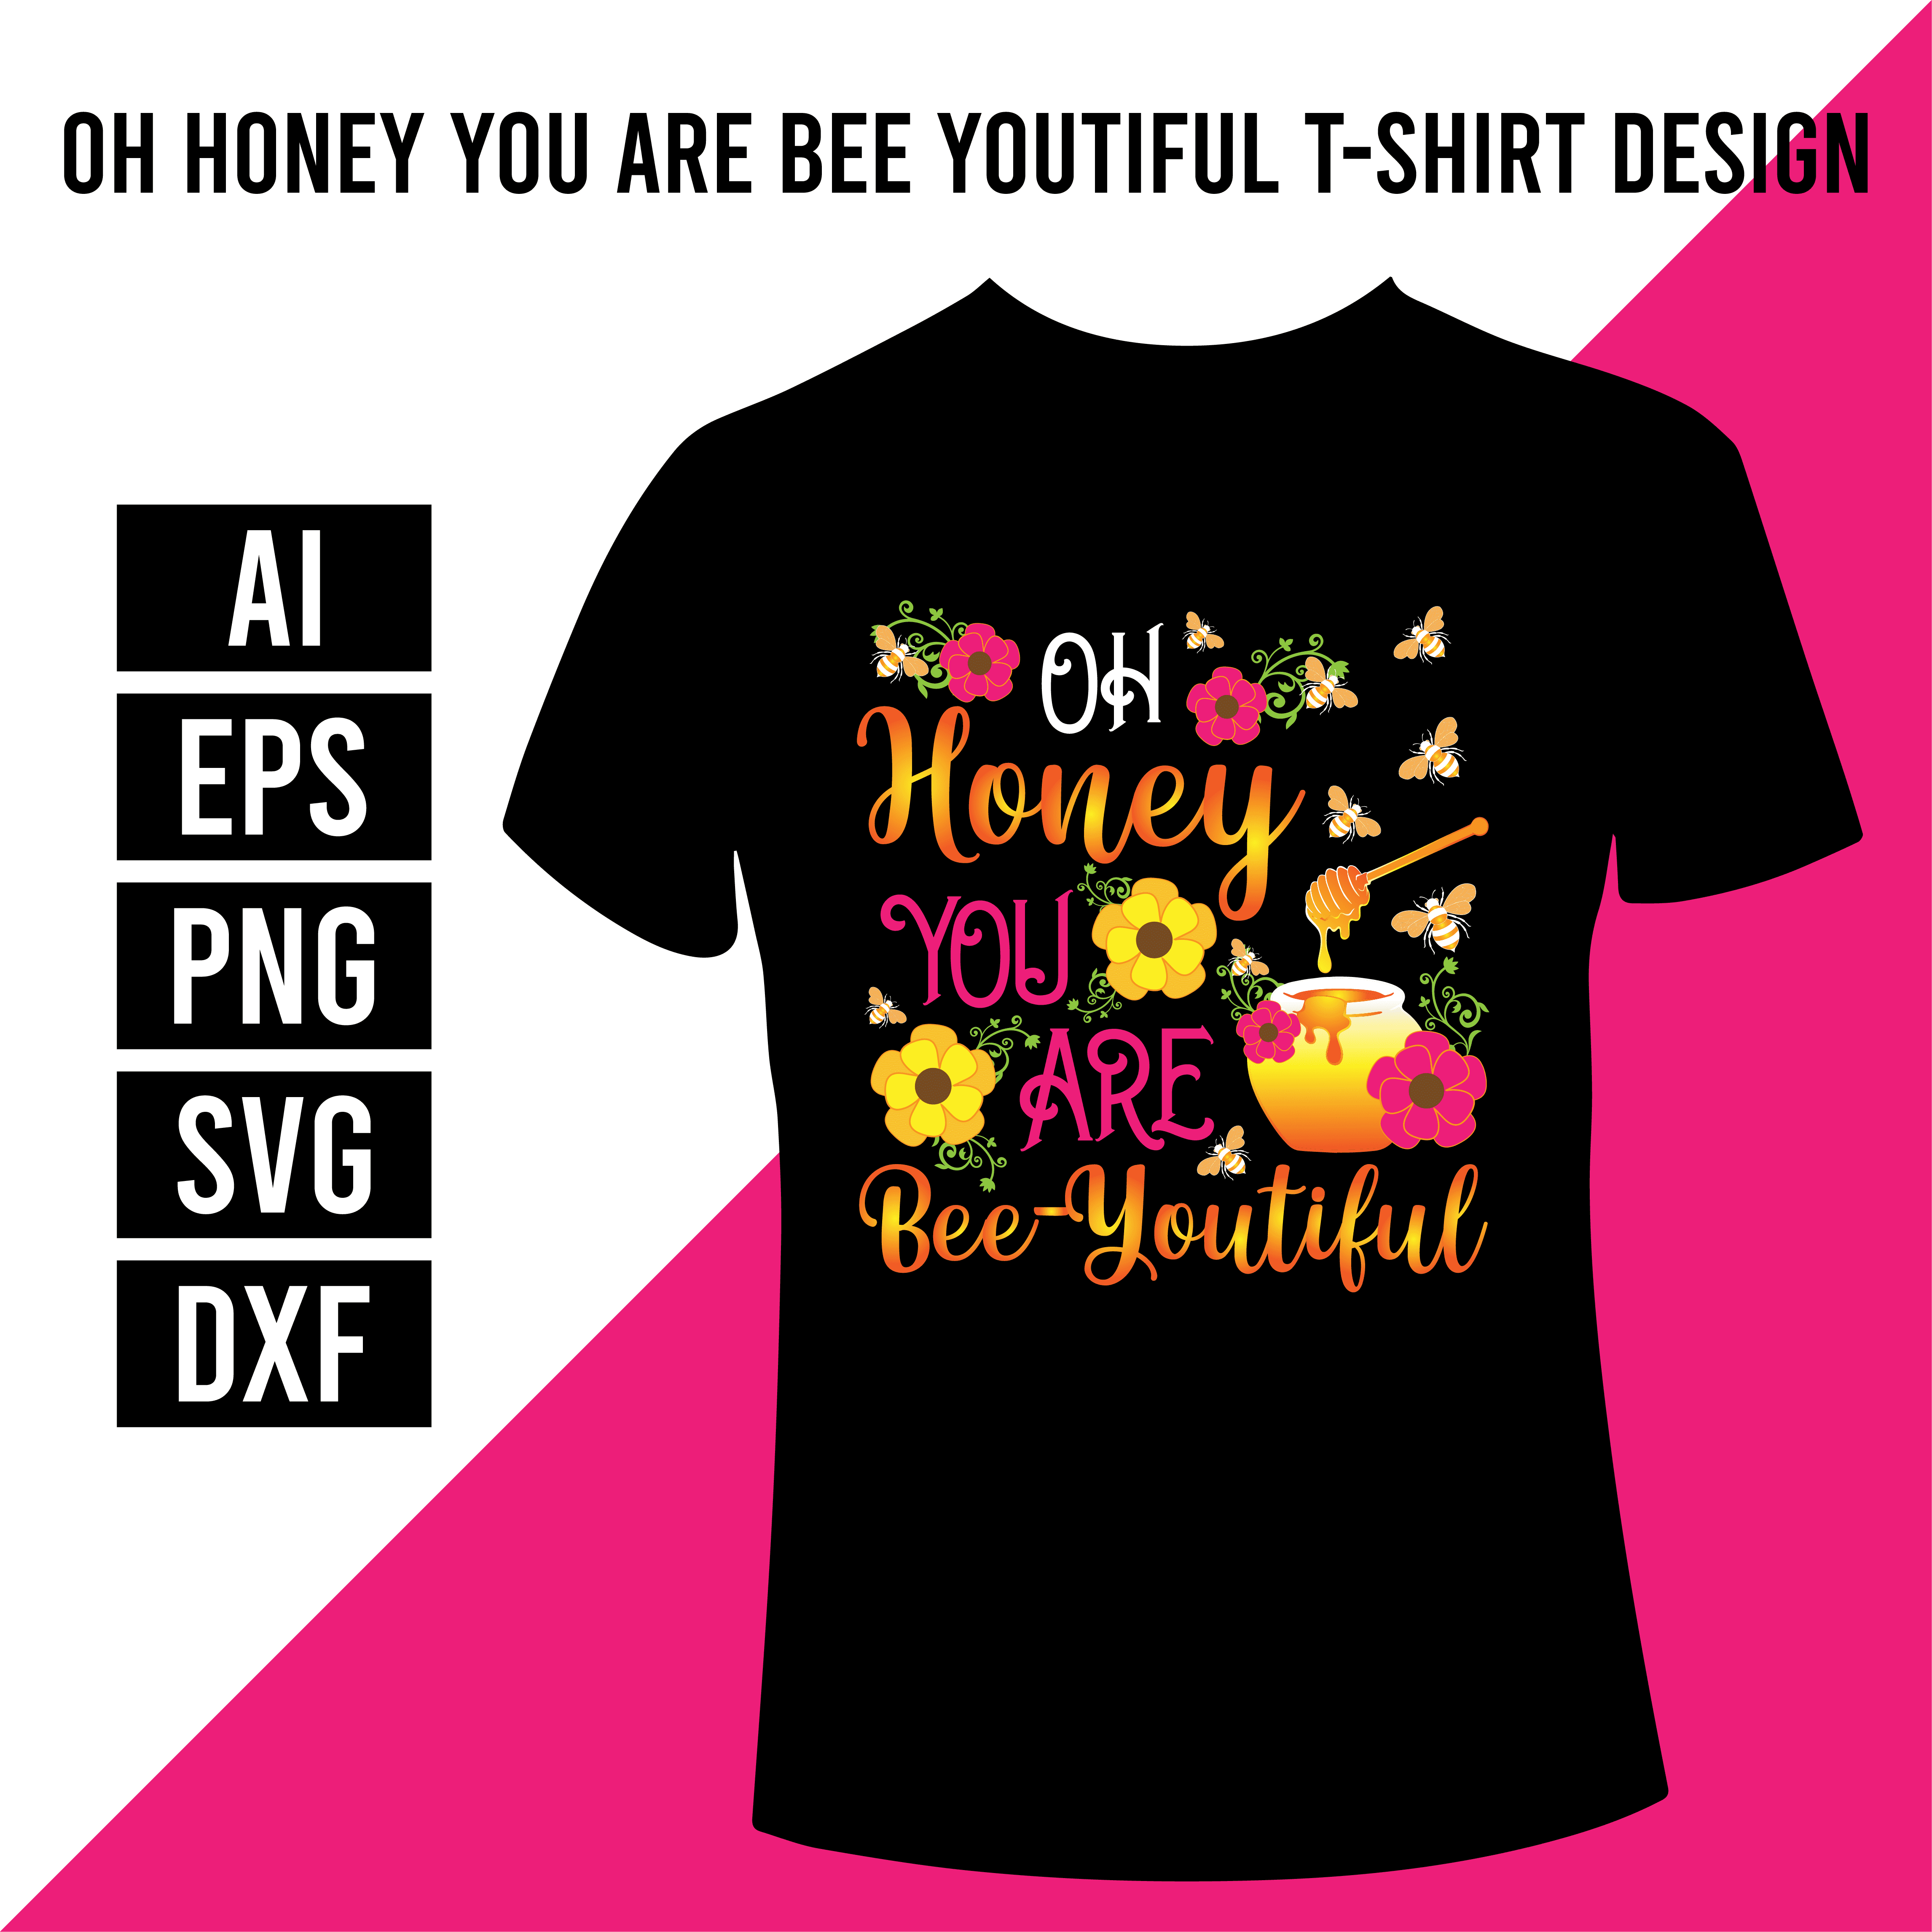 Oh Honey You Are Bee Youtiful T- Shirt Design main cover.